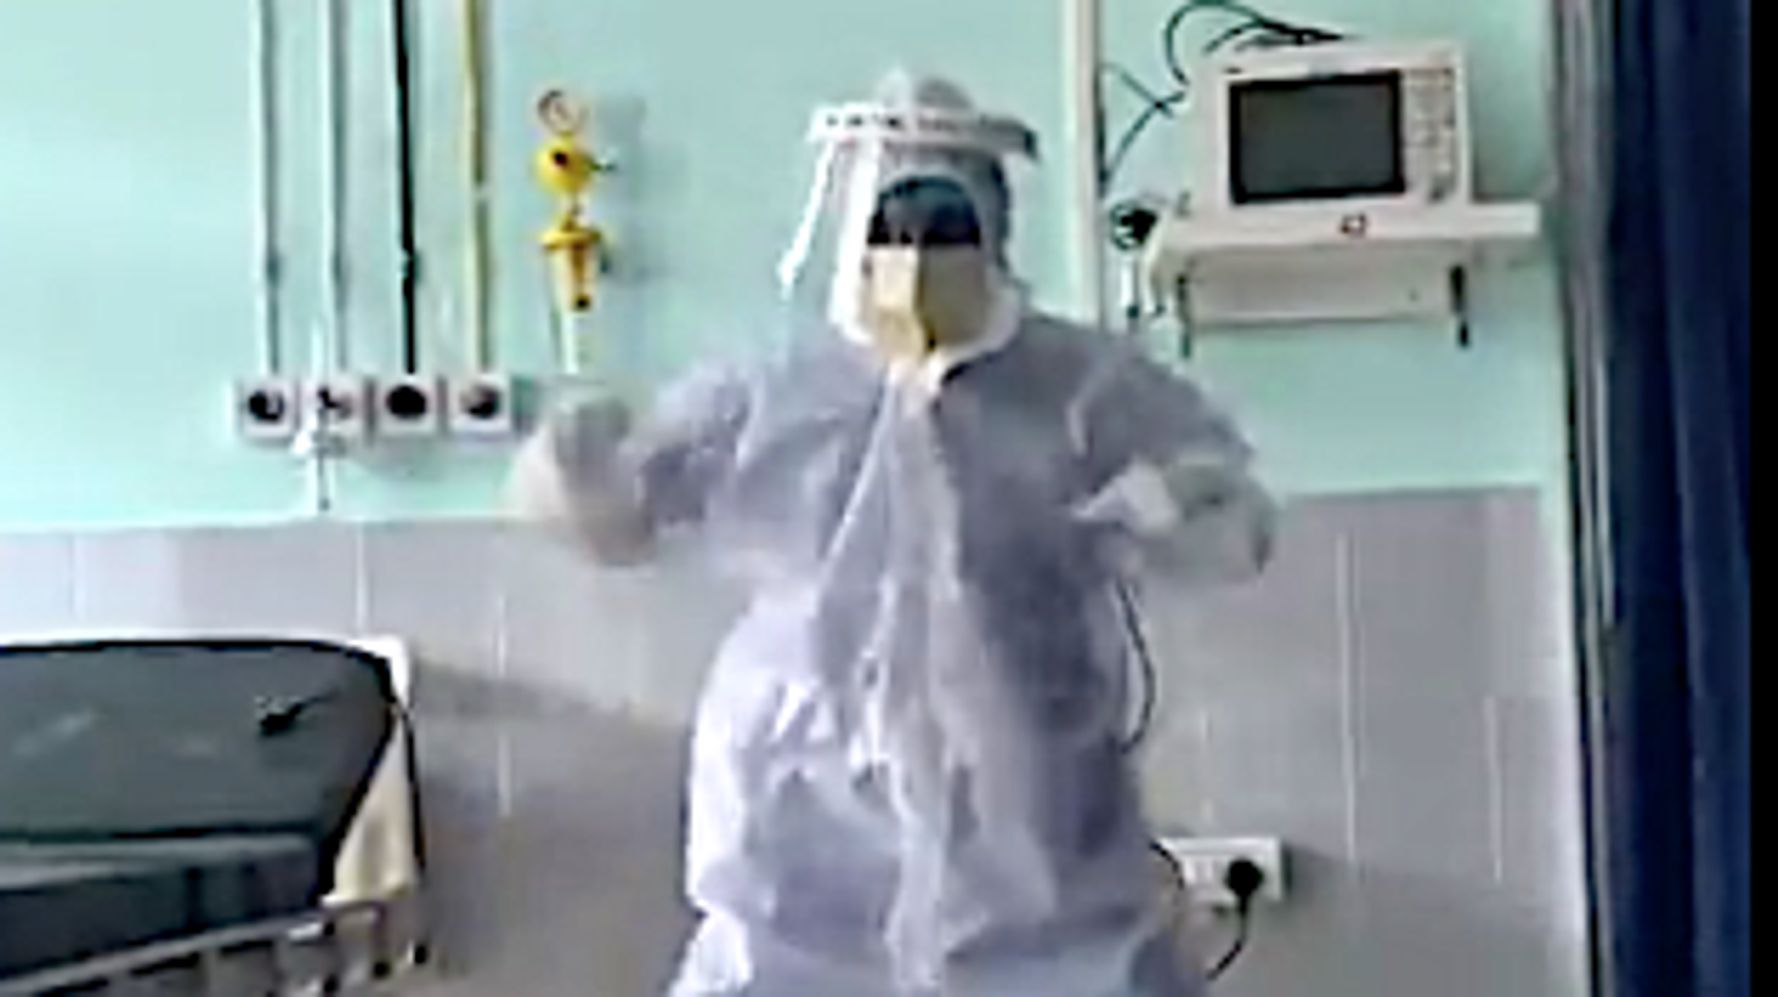 Dancing In The Dark: Doctor Cheers Up COVID-19 Patients By Busting Moves In Med Gear